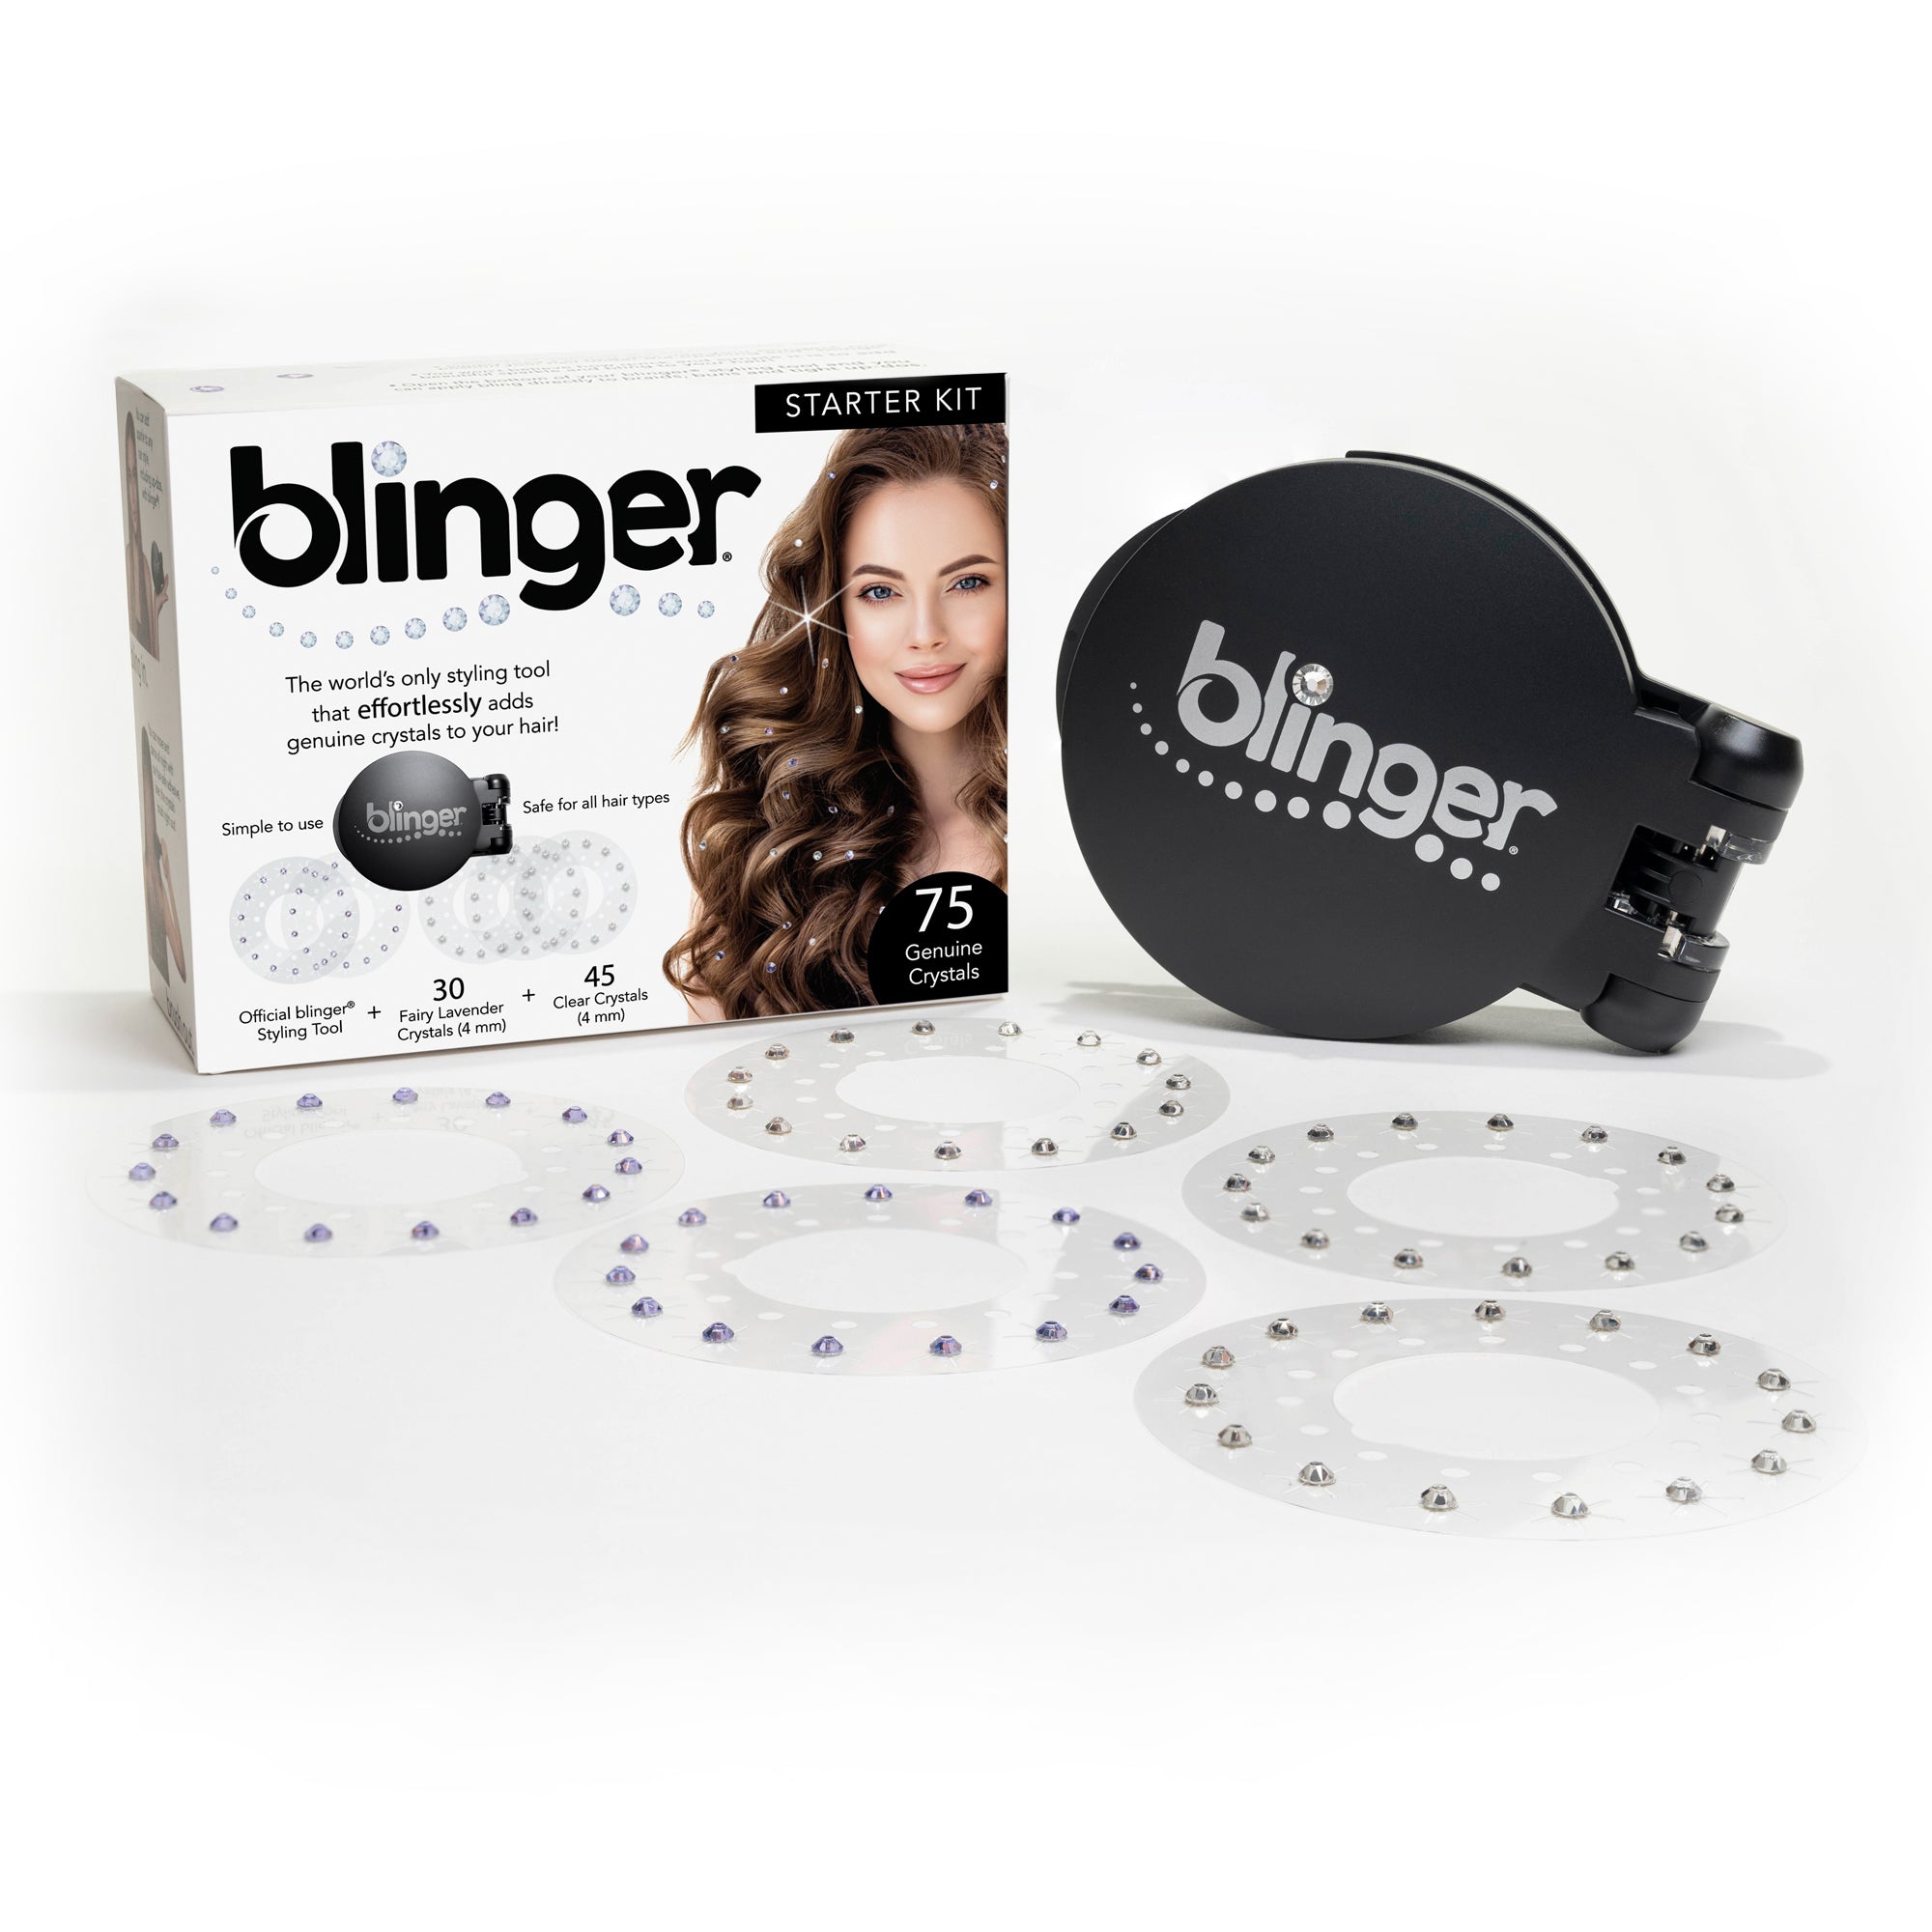 180 Gems Kit Blingers Deluxe Set Blinger Hair Gems Decoration Deluxe Set,  Glam Collection, Comes with Glam Styling Tool - Realistic Reborn Dolls for  Sale